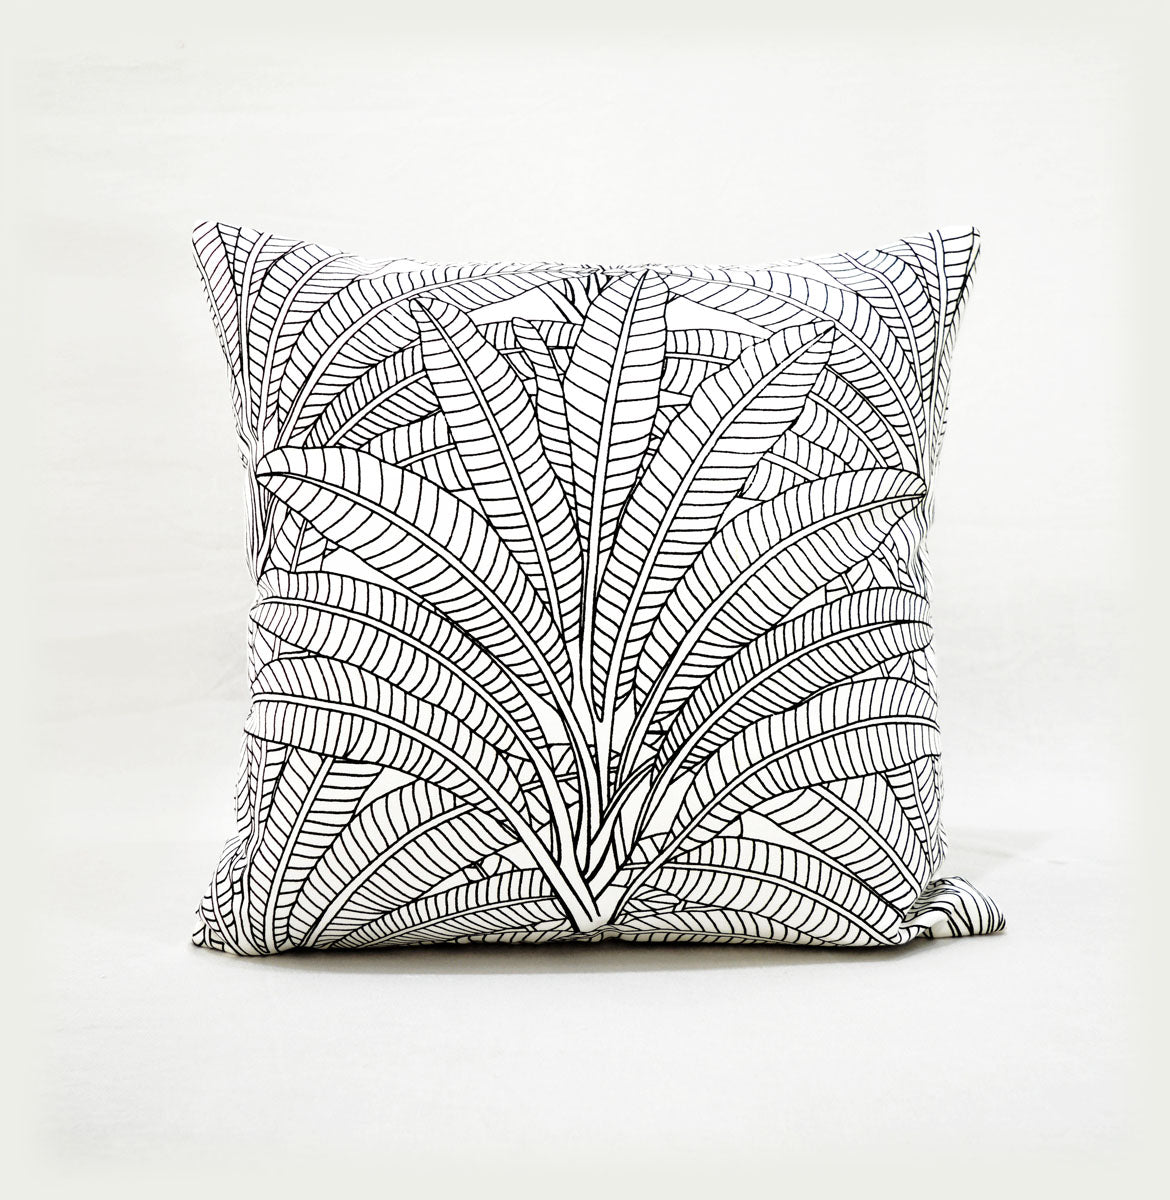 Pichwai - Tropical palm print, black and white, square pillow cover